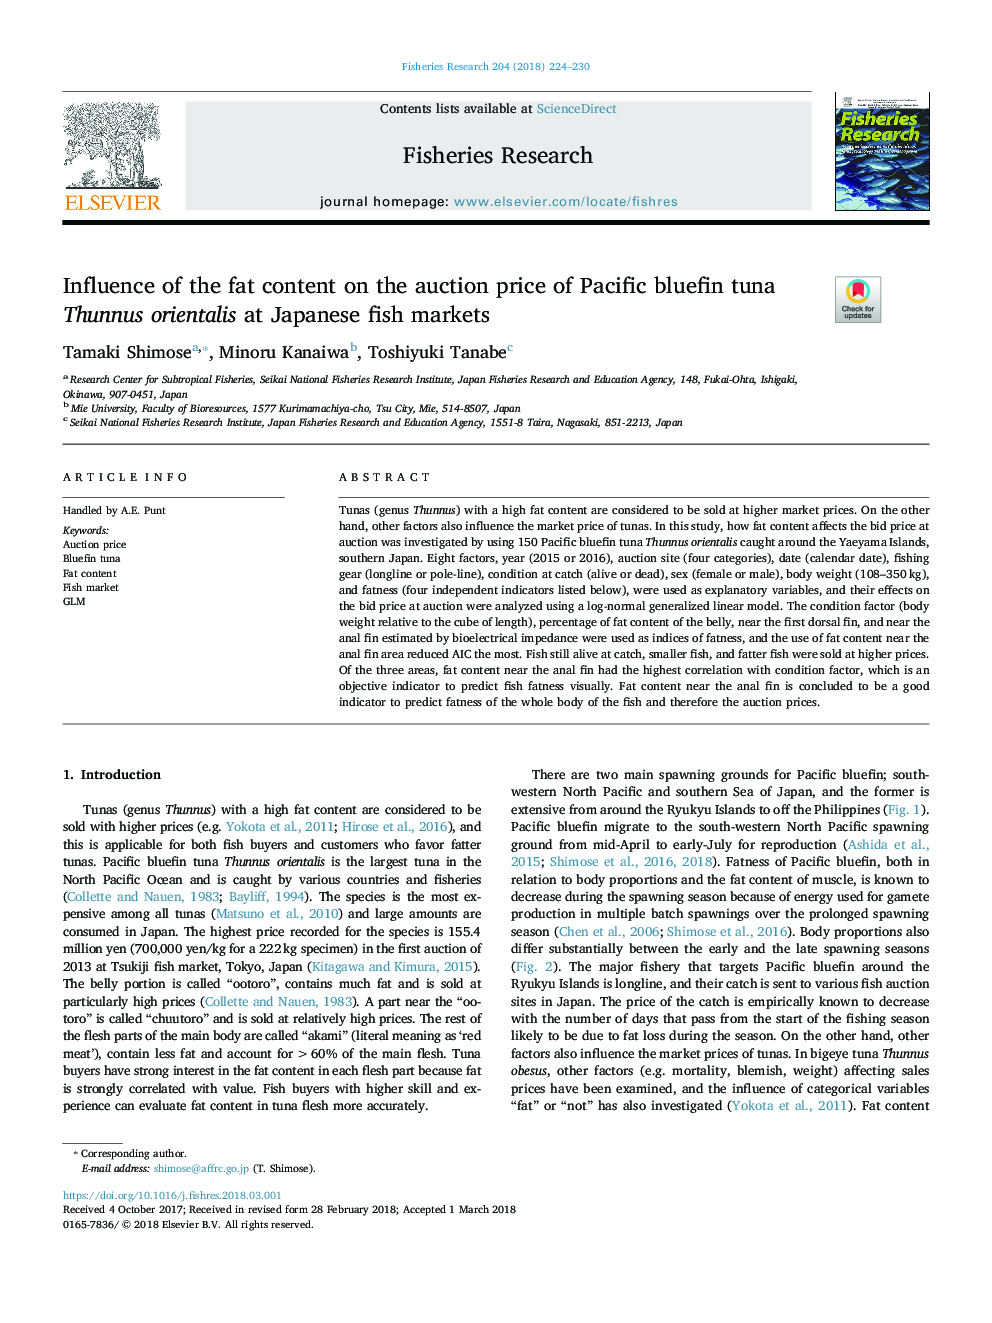 Influence of the fat content on the auction price of Pacific bluefin tuna Thunnus orientalis at Japanese fish markets